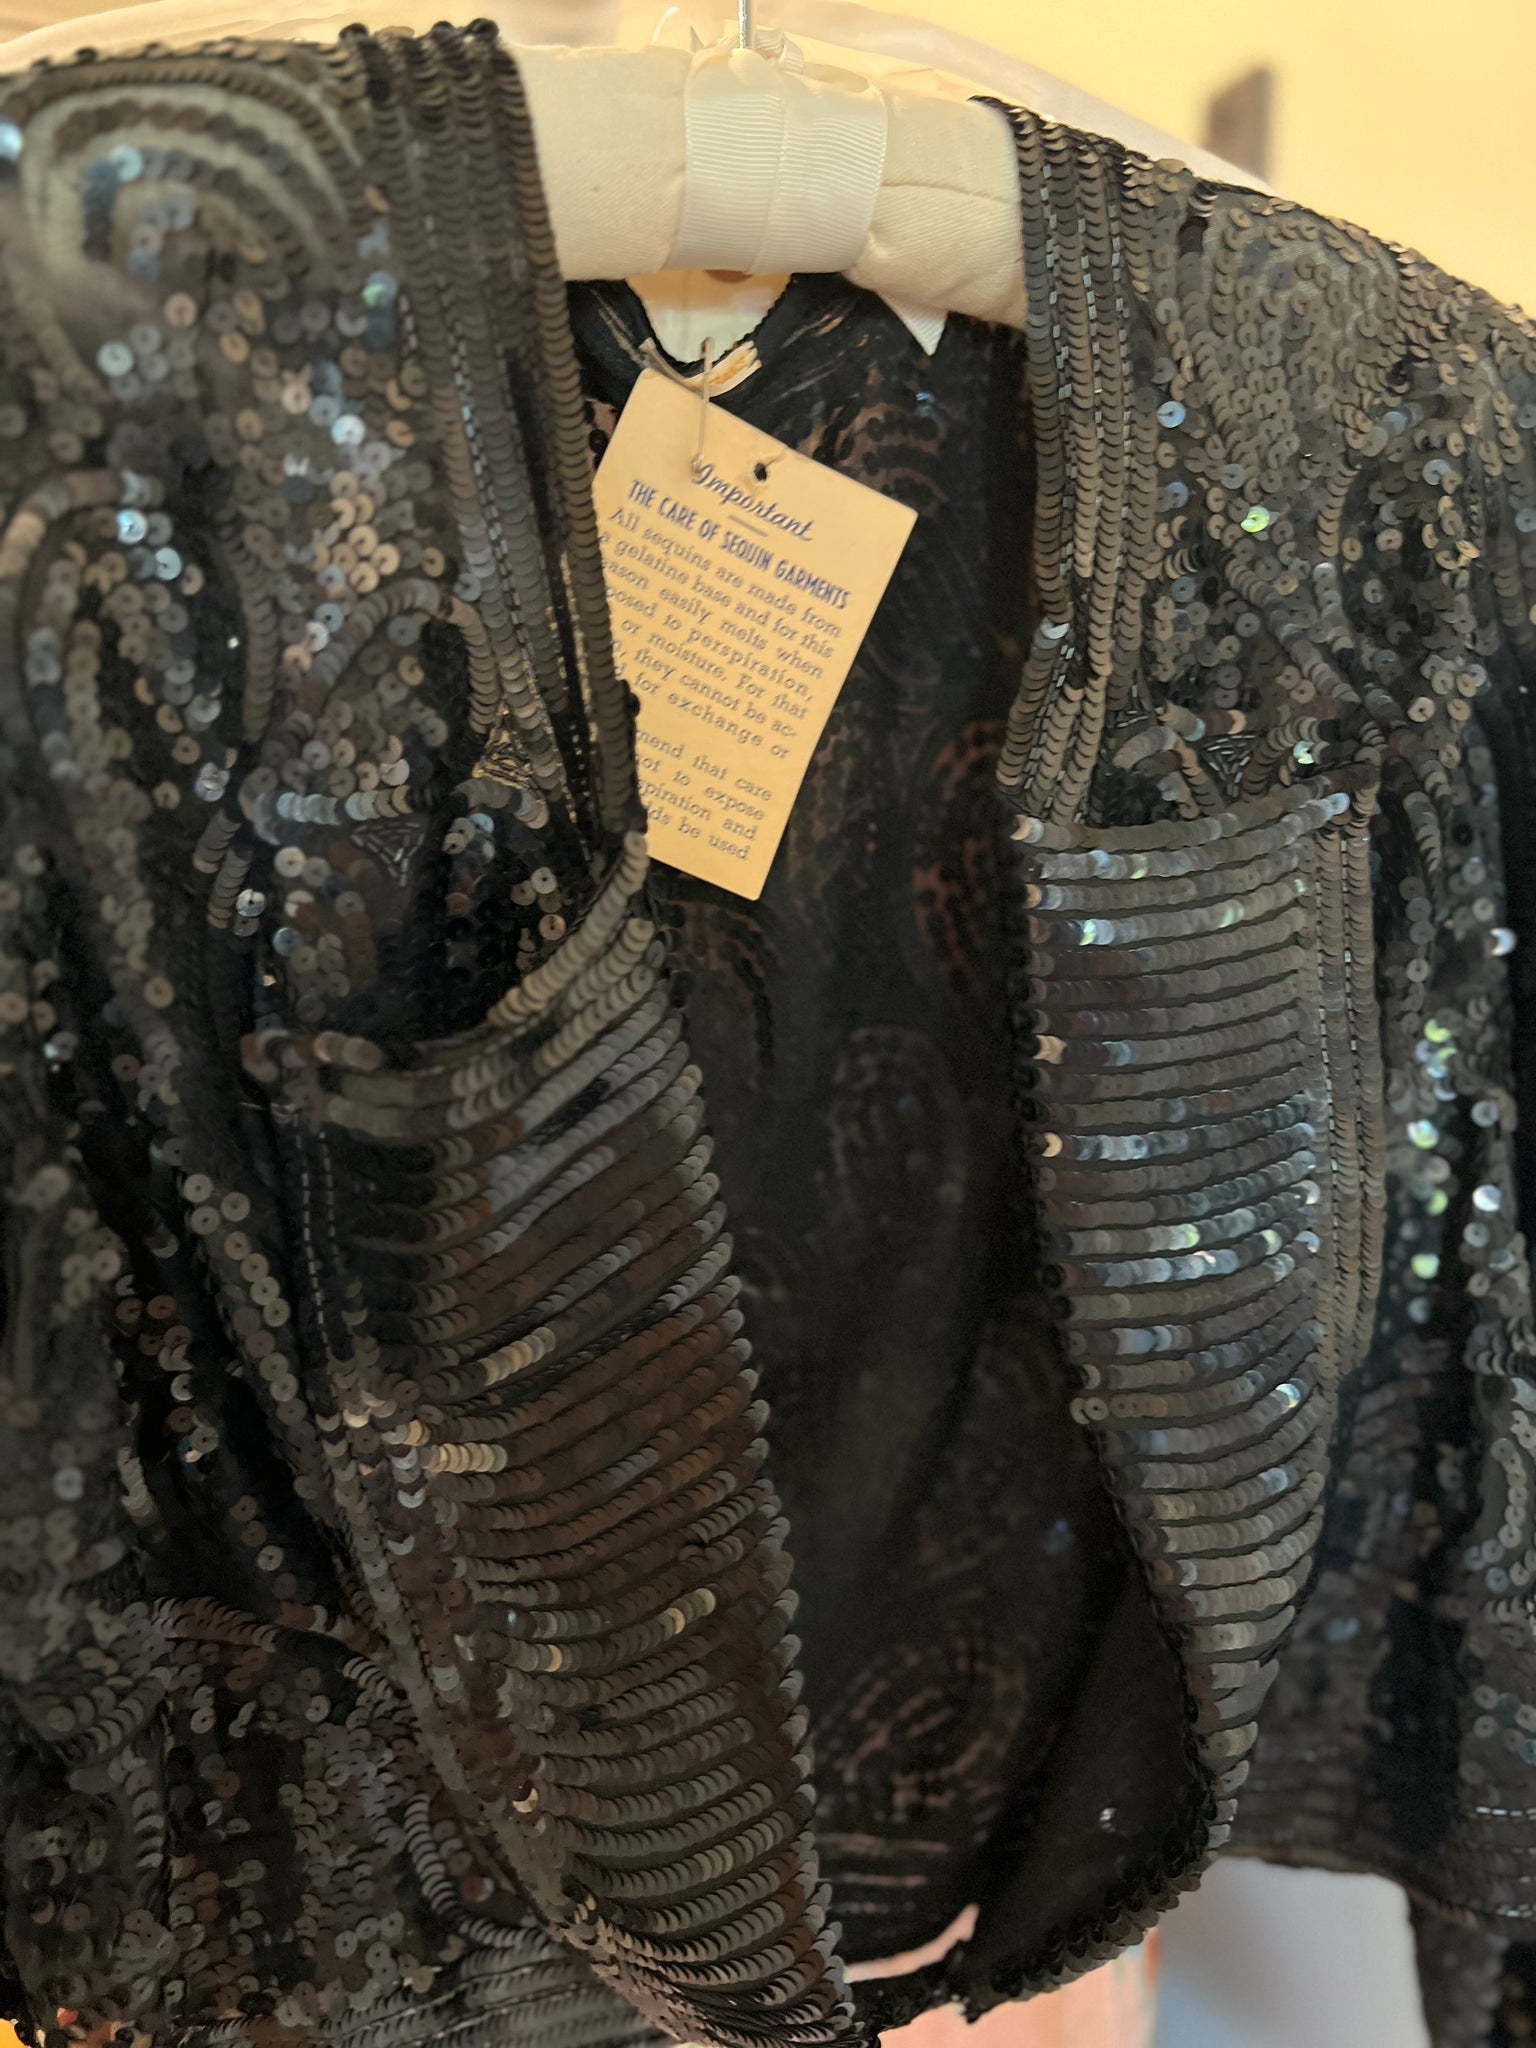 30s French gelatin sequin blouse